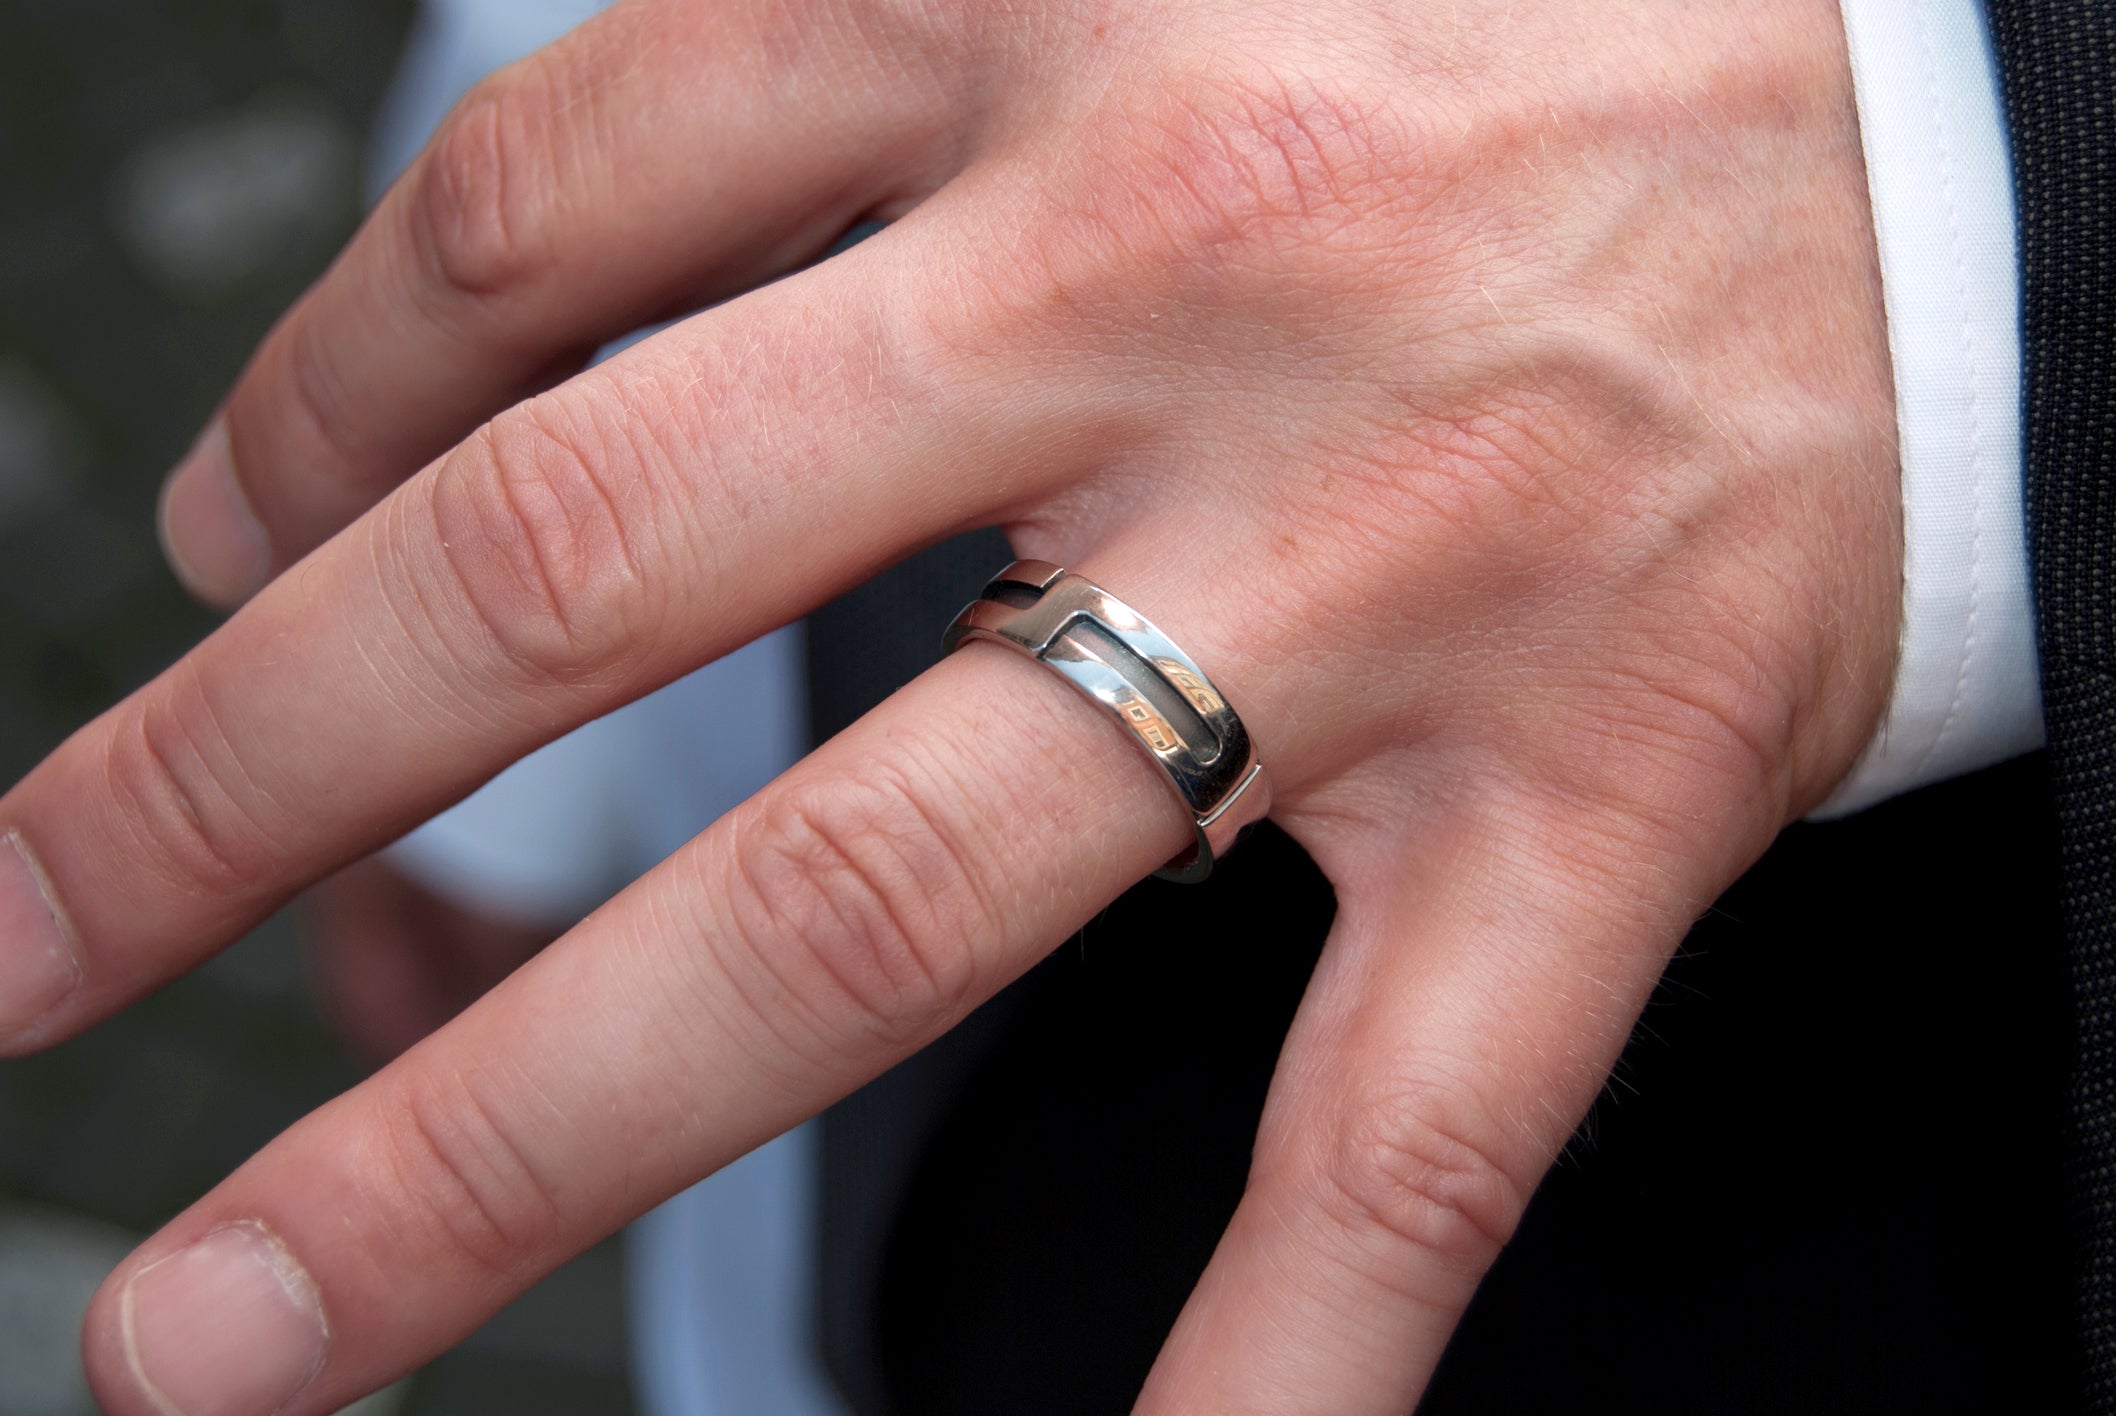 How Tight Should a Man's Wedding Ring Be?